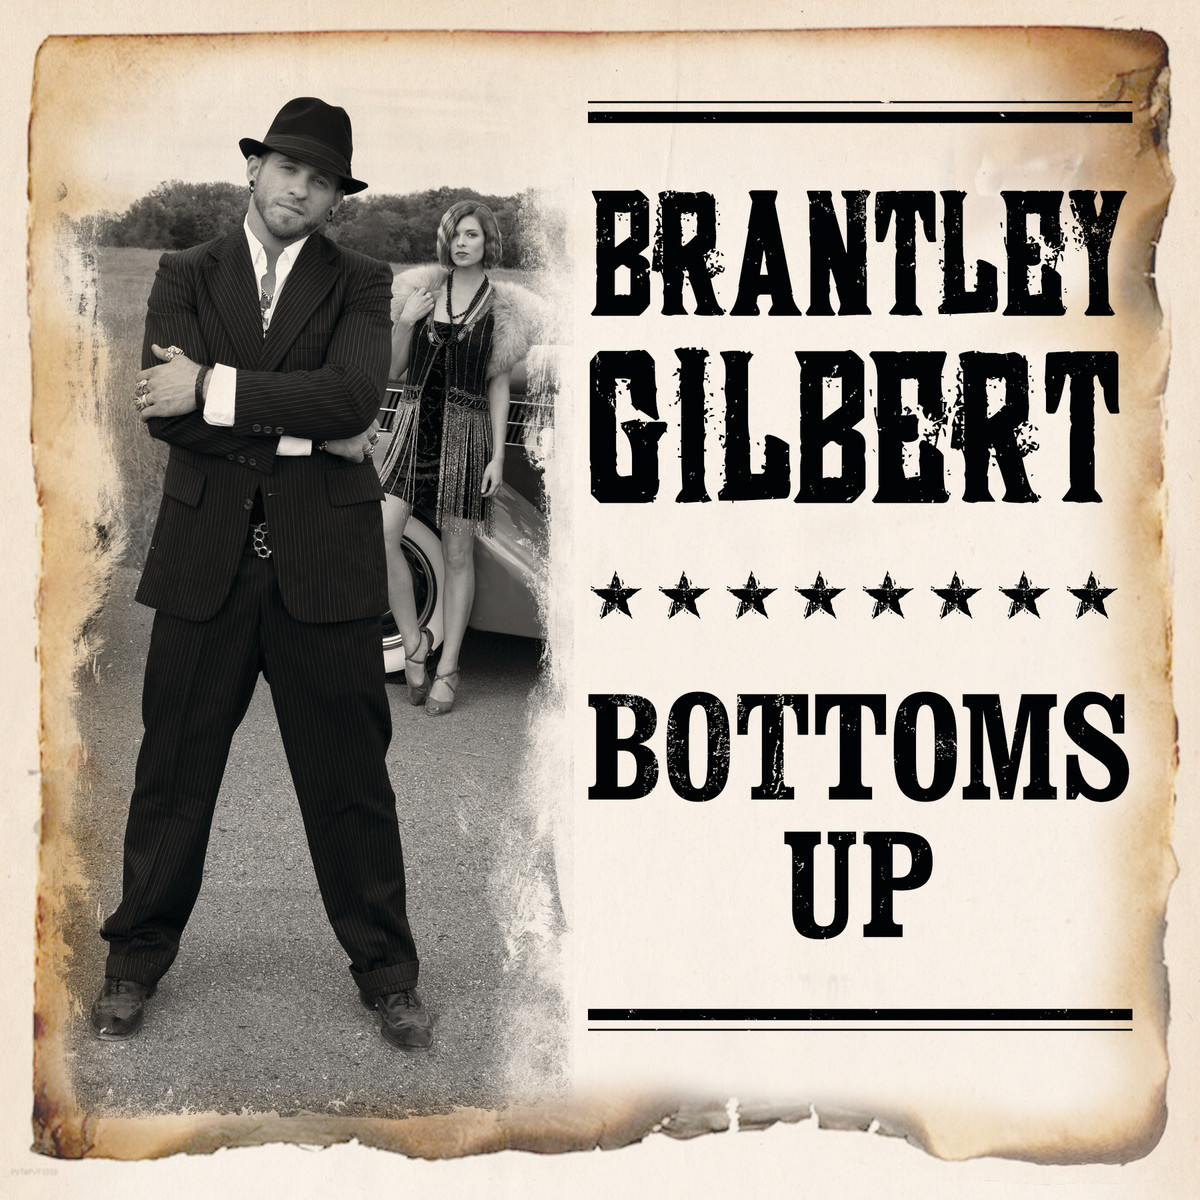 Brantley Gilbert image and pictorial